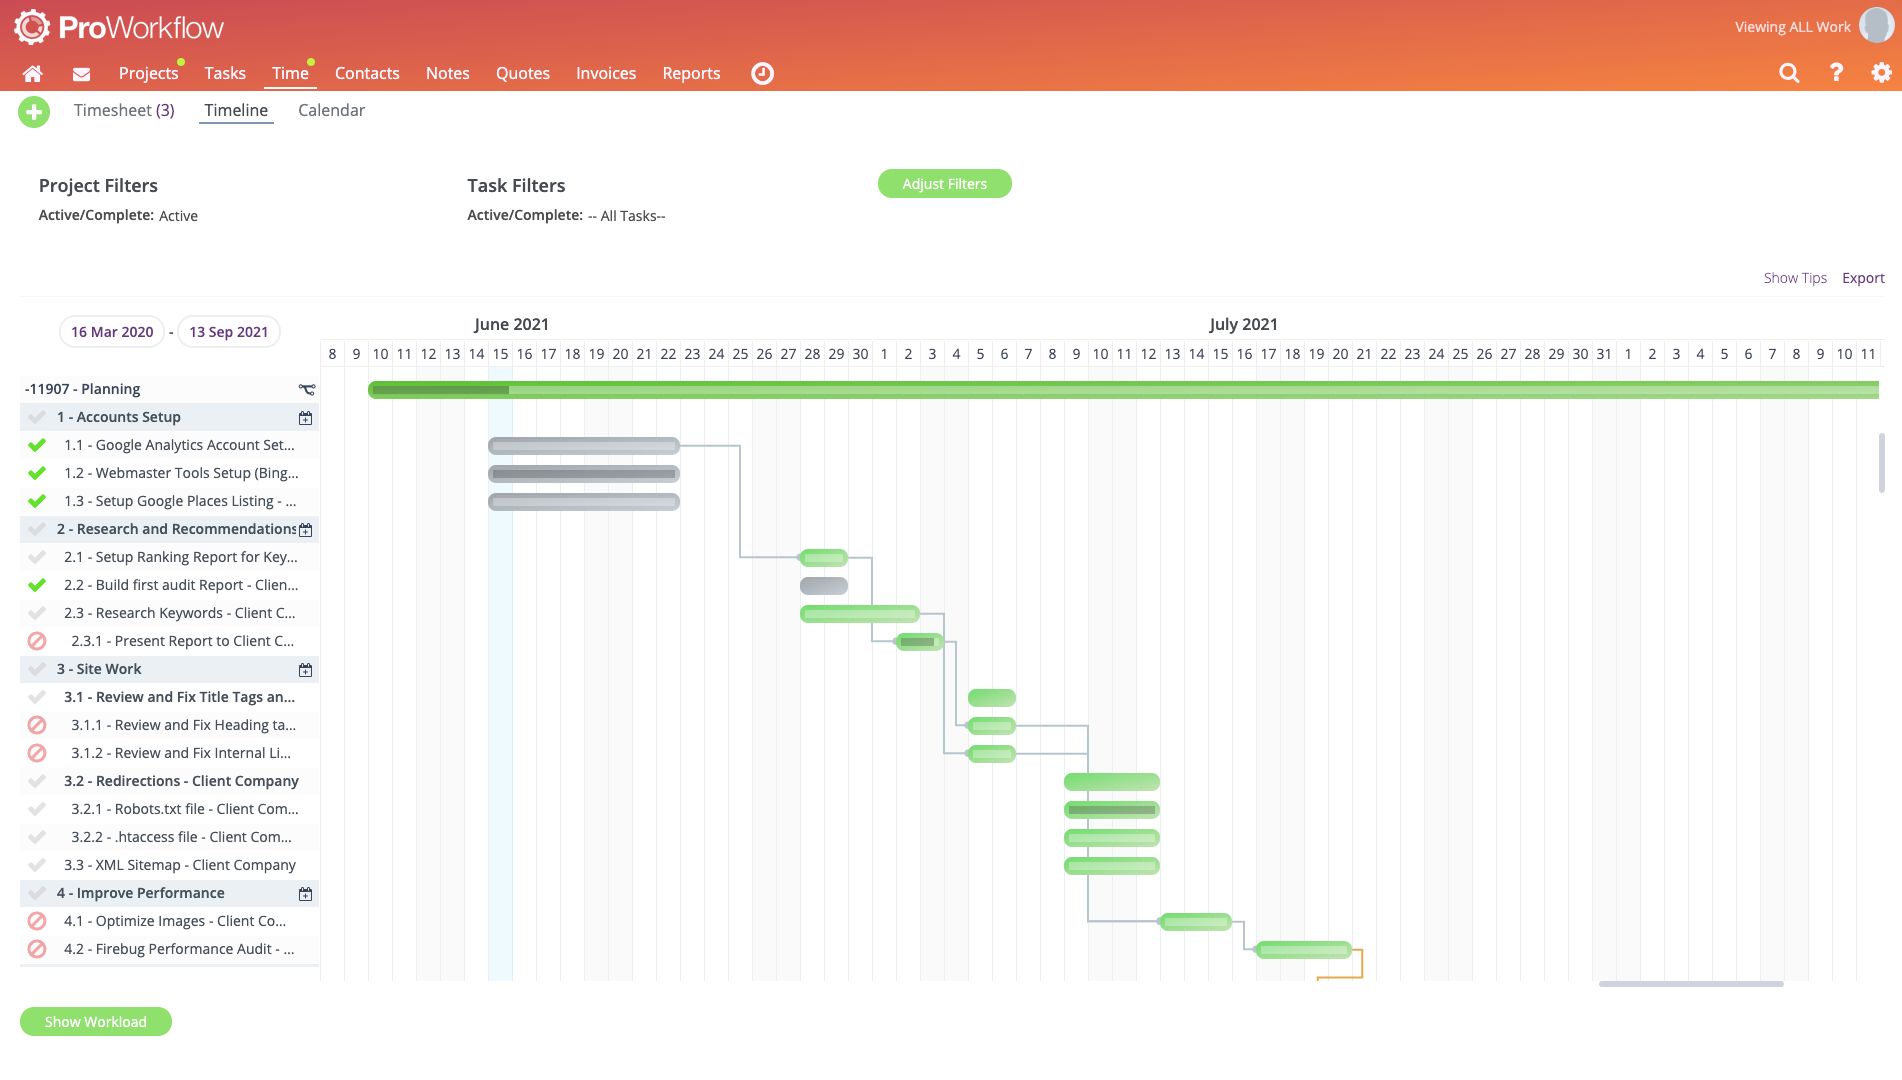 Gantt Chart - Keep a birds-eye view on Projects and Tasks with an easy-to-use Gantt Chart Timeline. Supercharge your projects with drag & drop features to reschedule work easily.